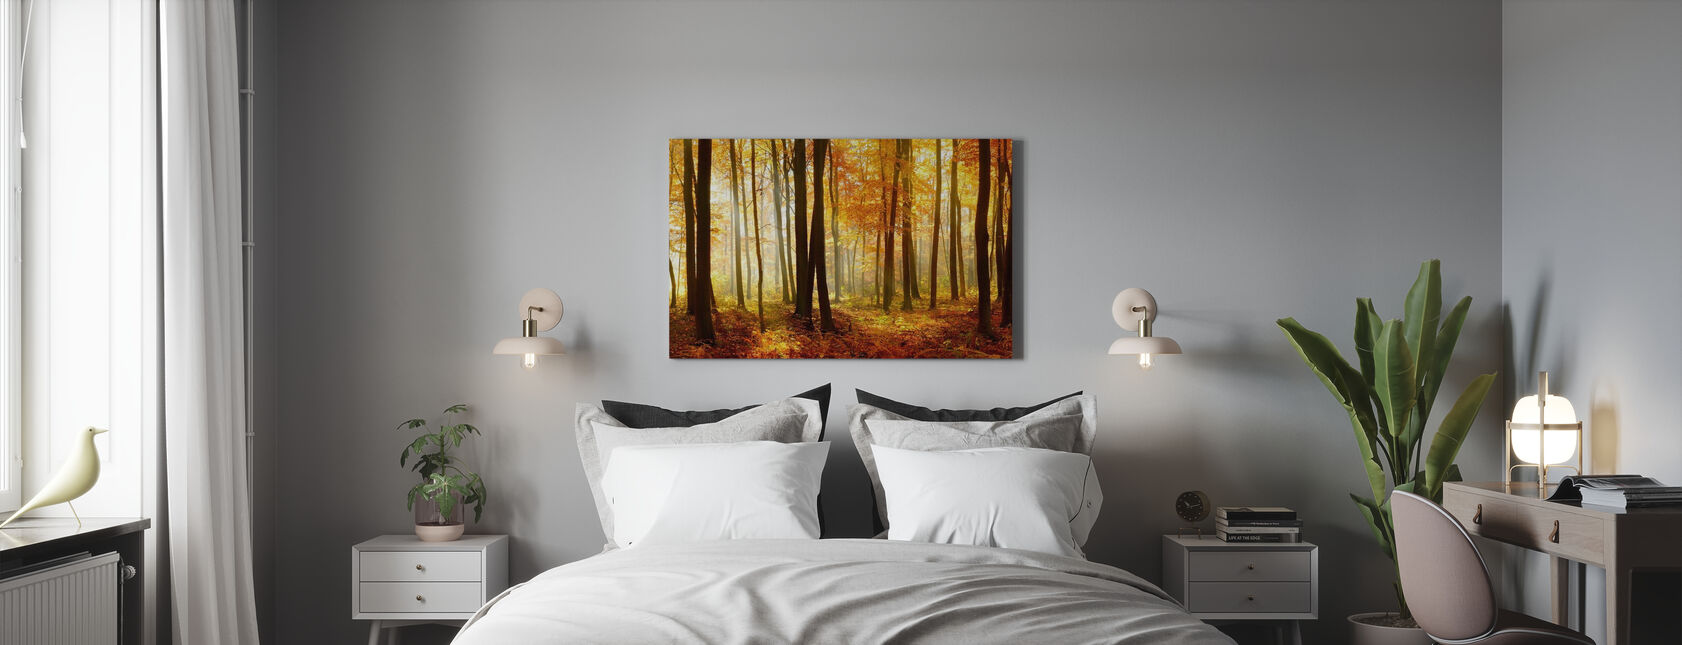 Japanese Forest - Canvas print - Bedroom